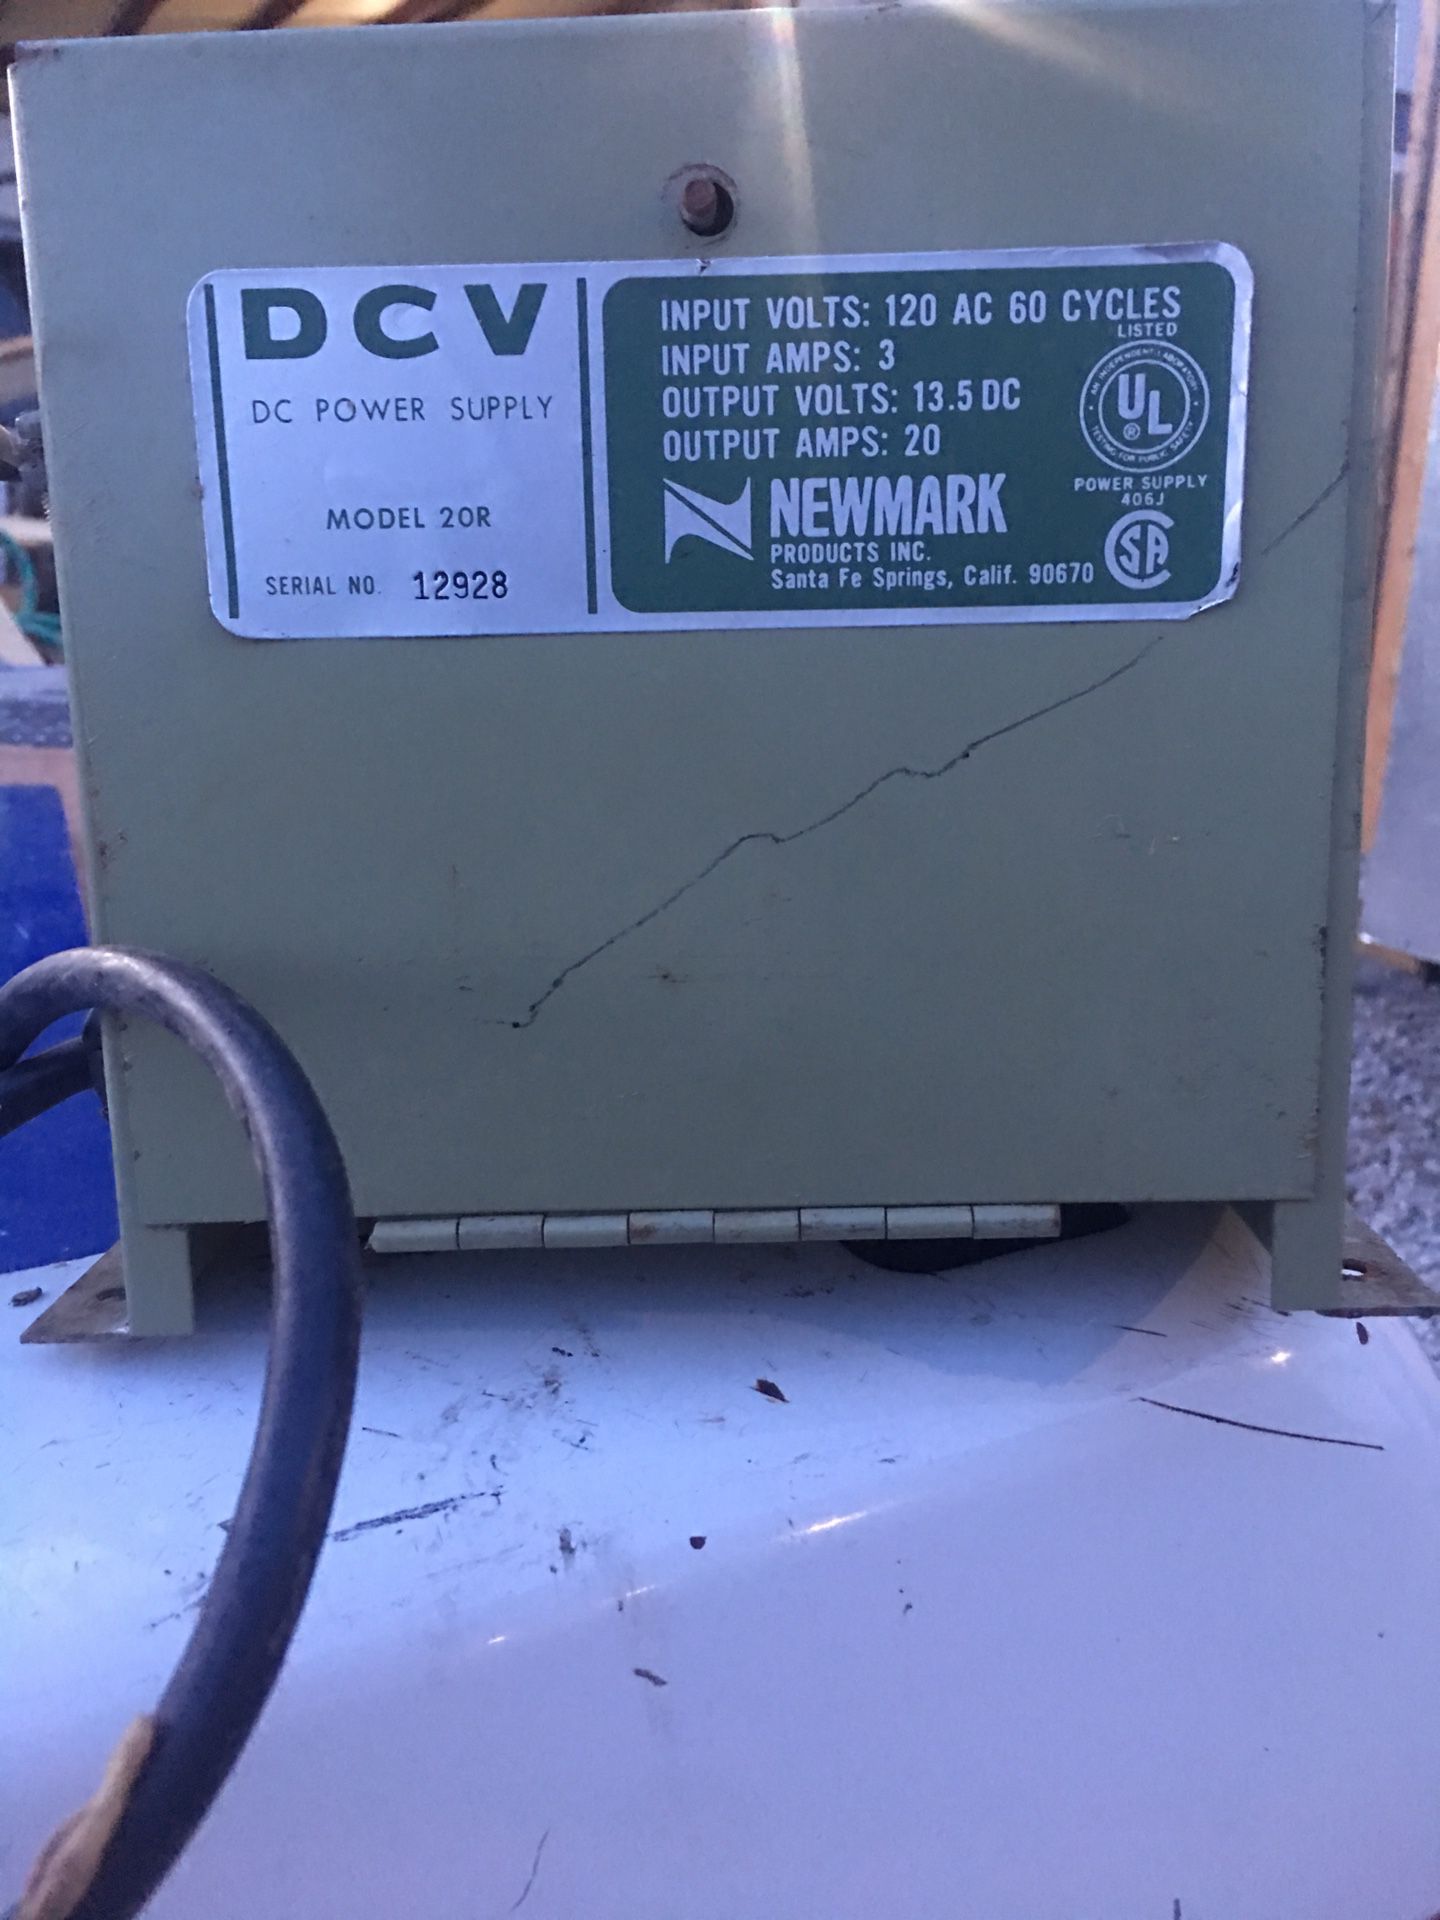 Newmark DCV Power Supply for travel trailers